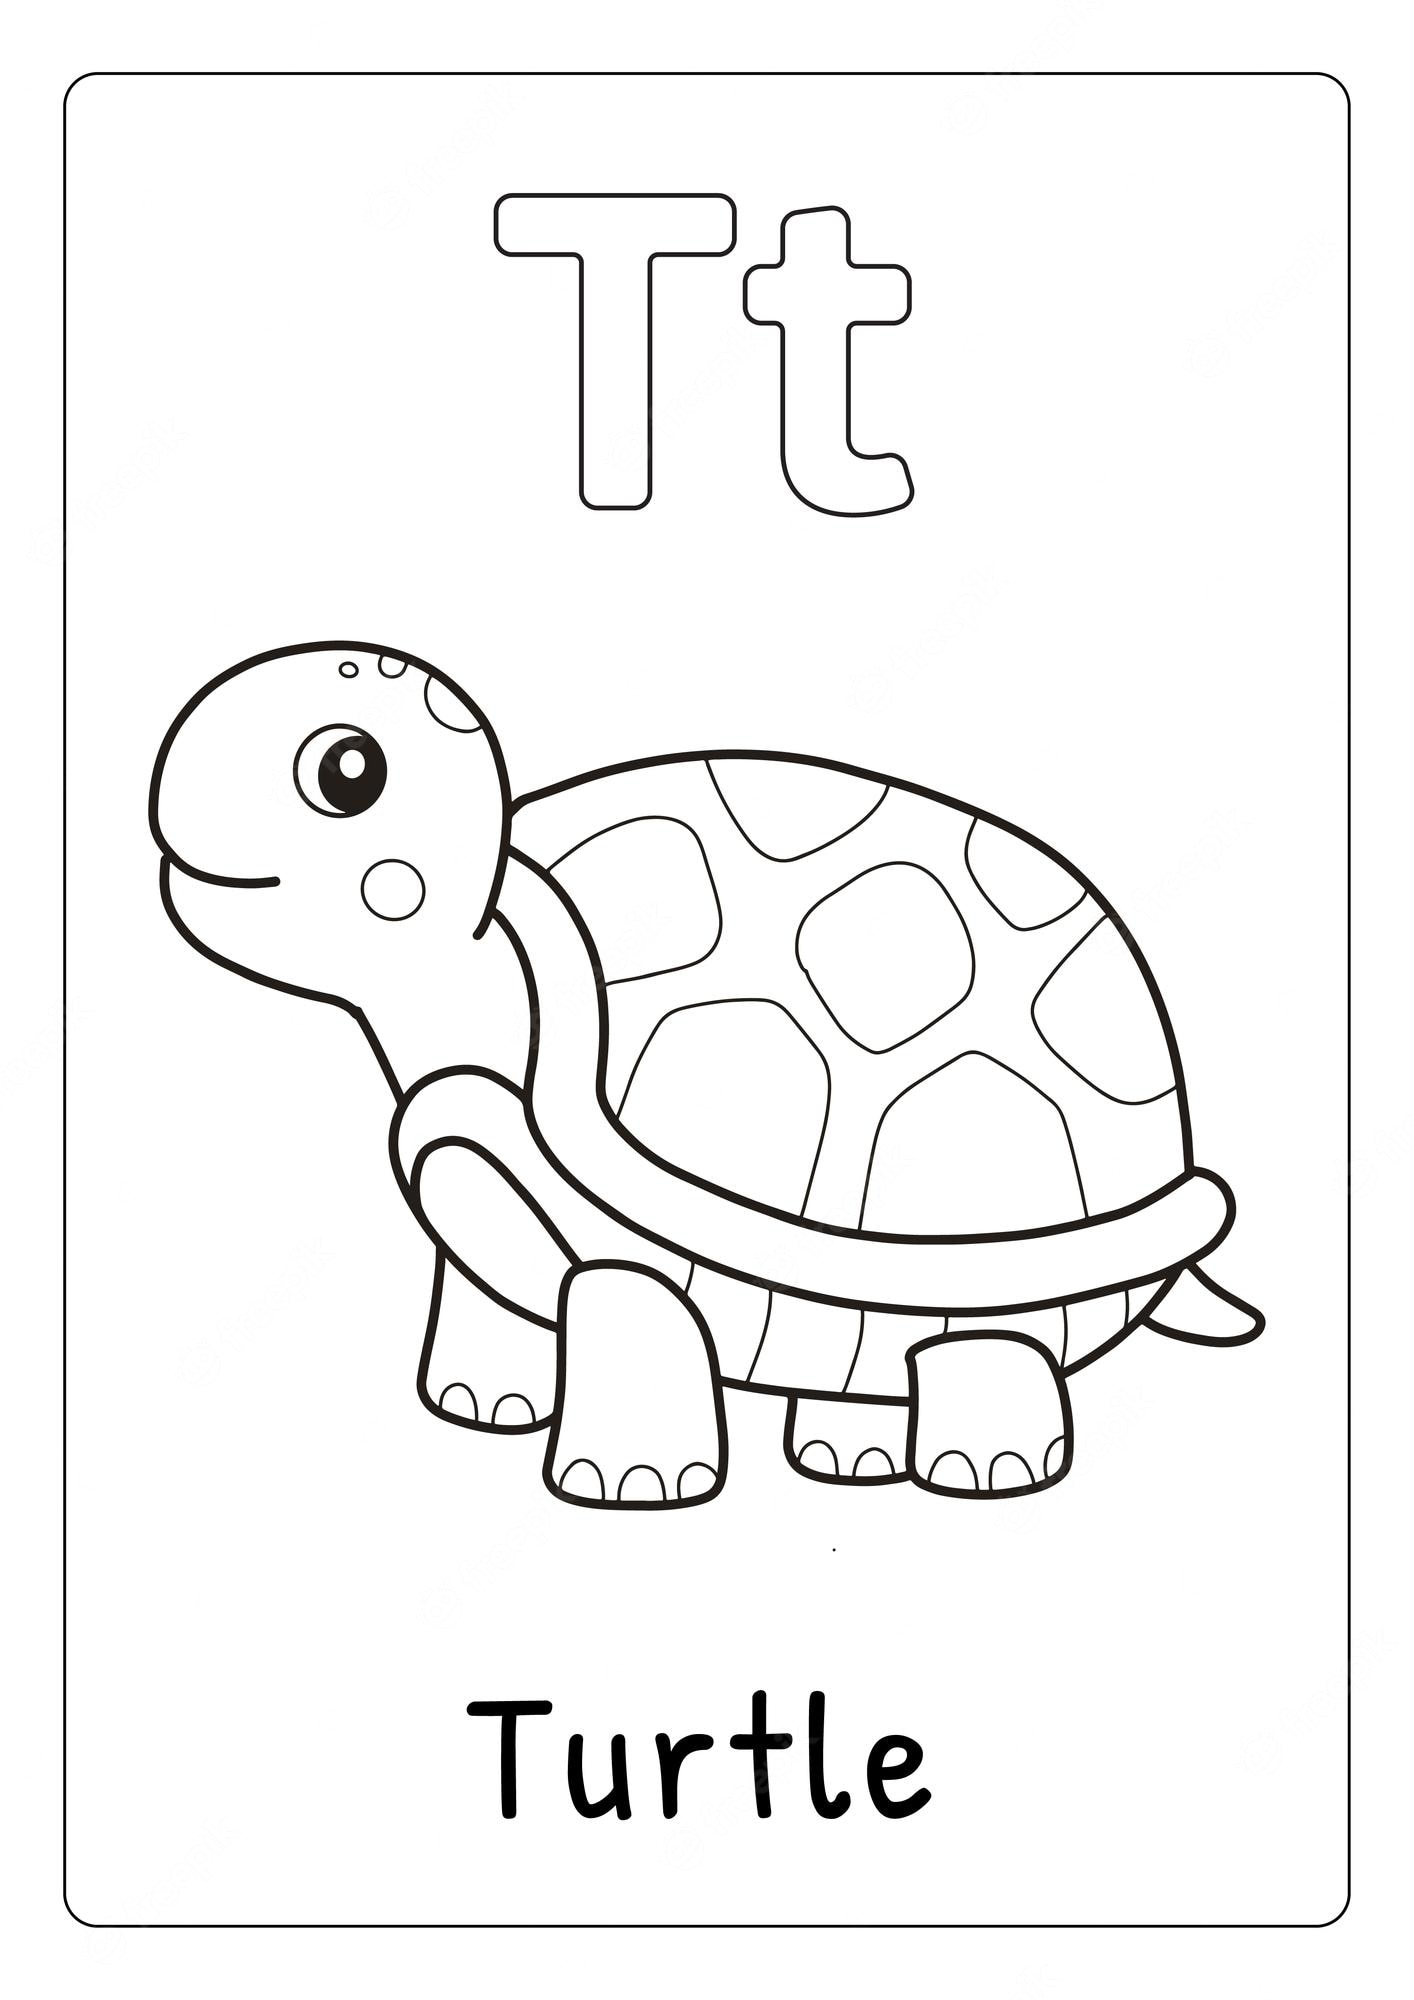 Premium Vector | Alphabet letter t for turtle coloring page for kids